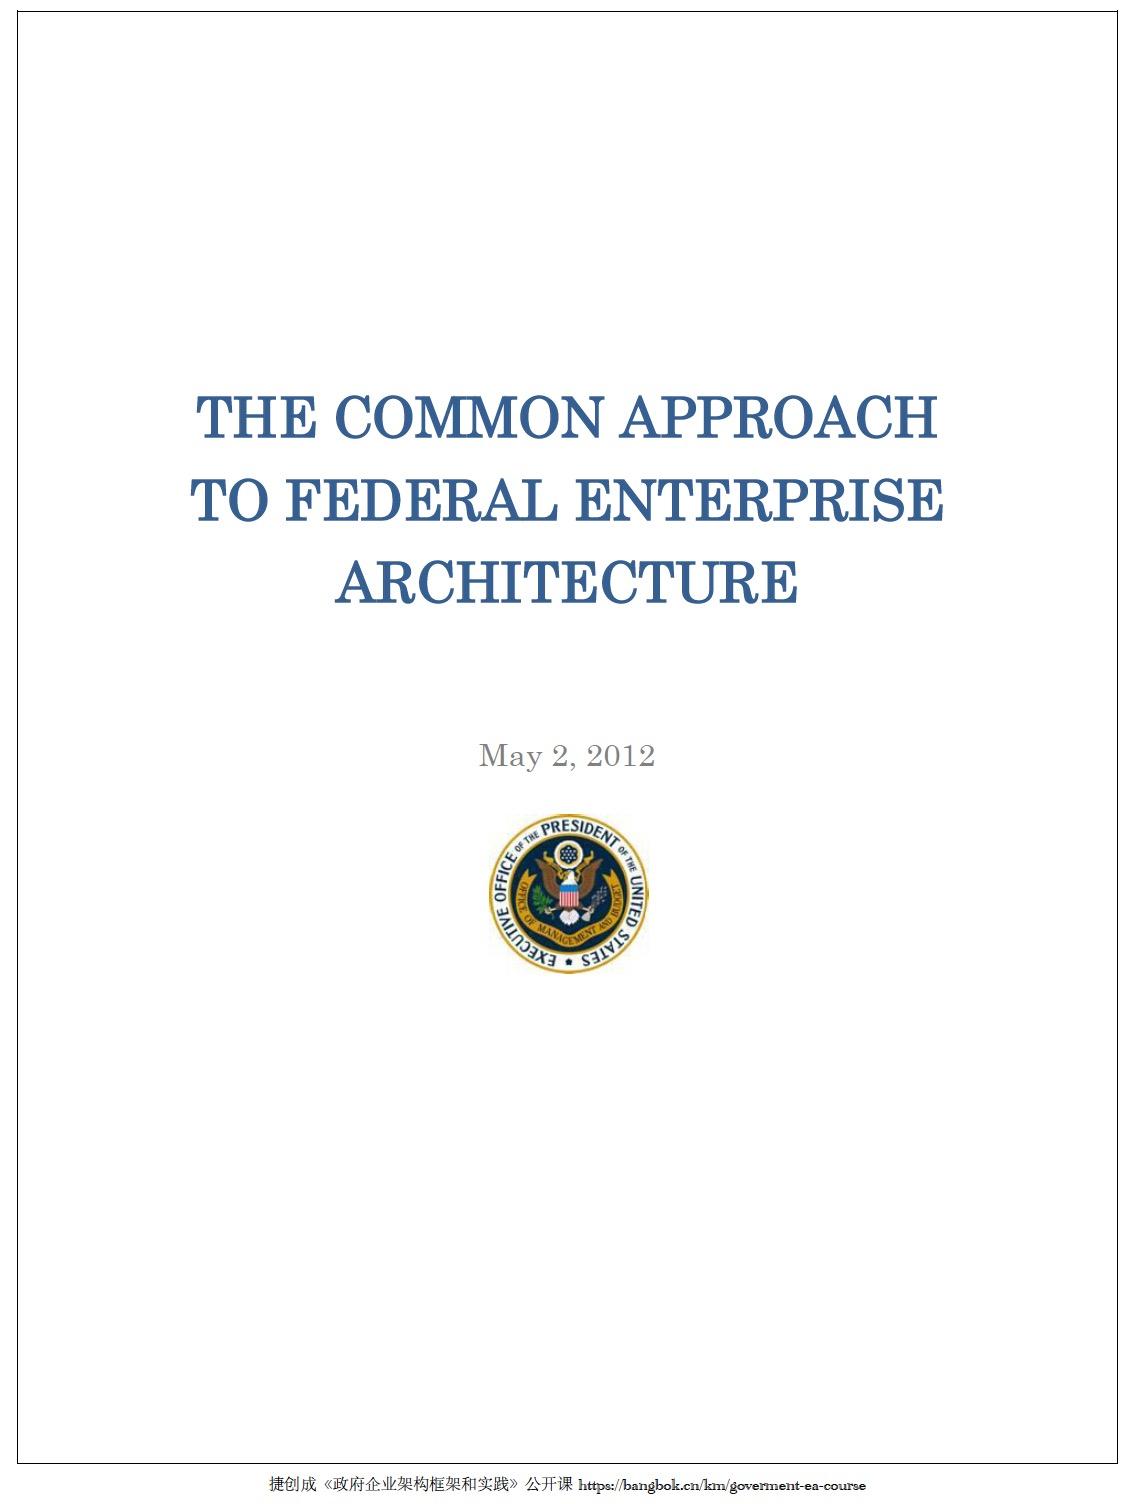 THE COMMON APPROACH TO FEDERAL ENTERPRISE ARCHITECTURE